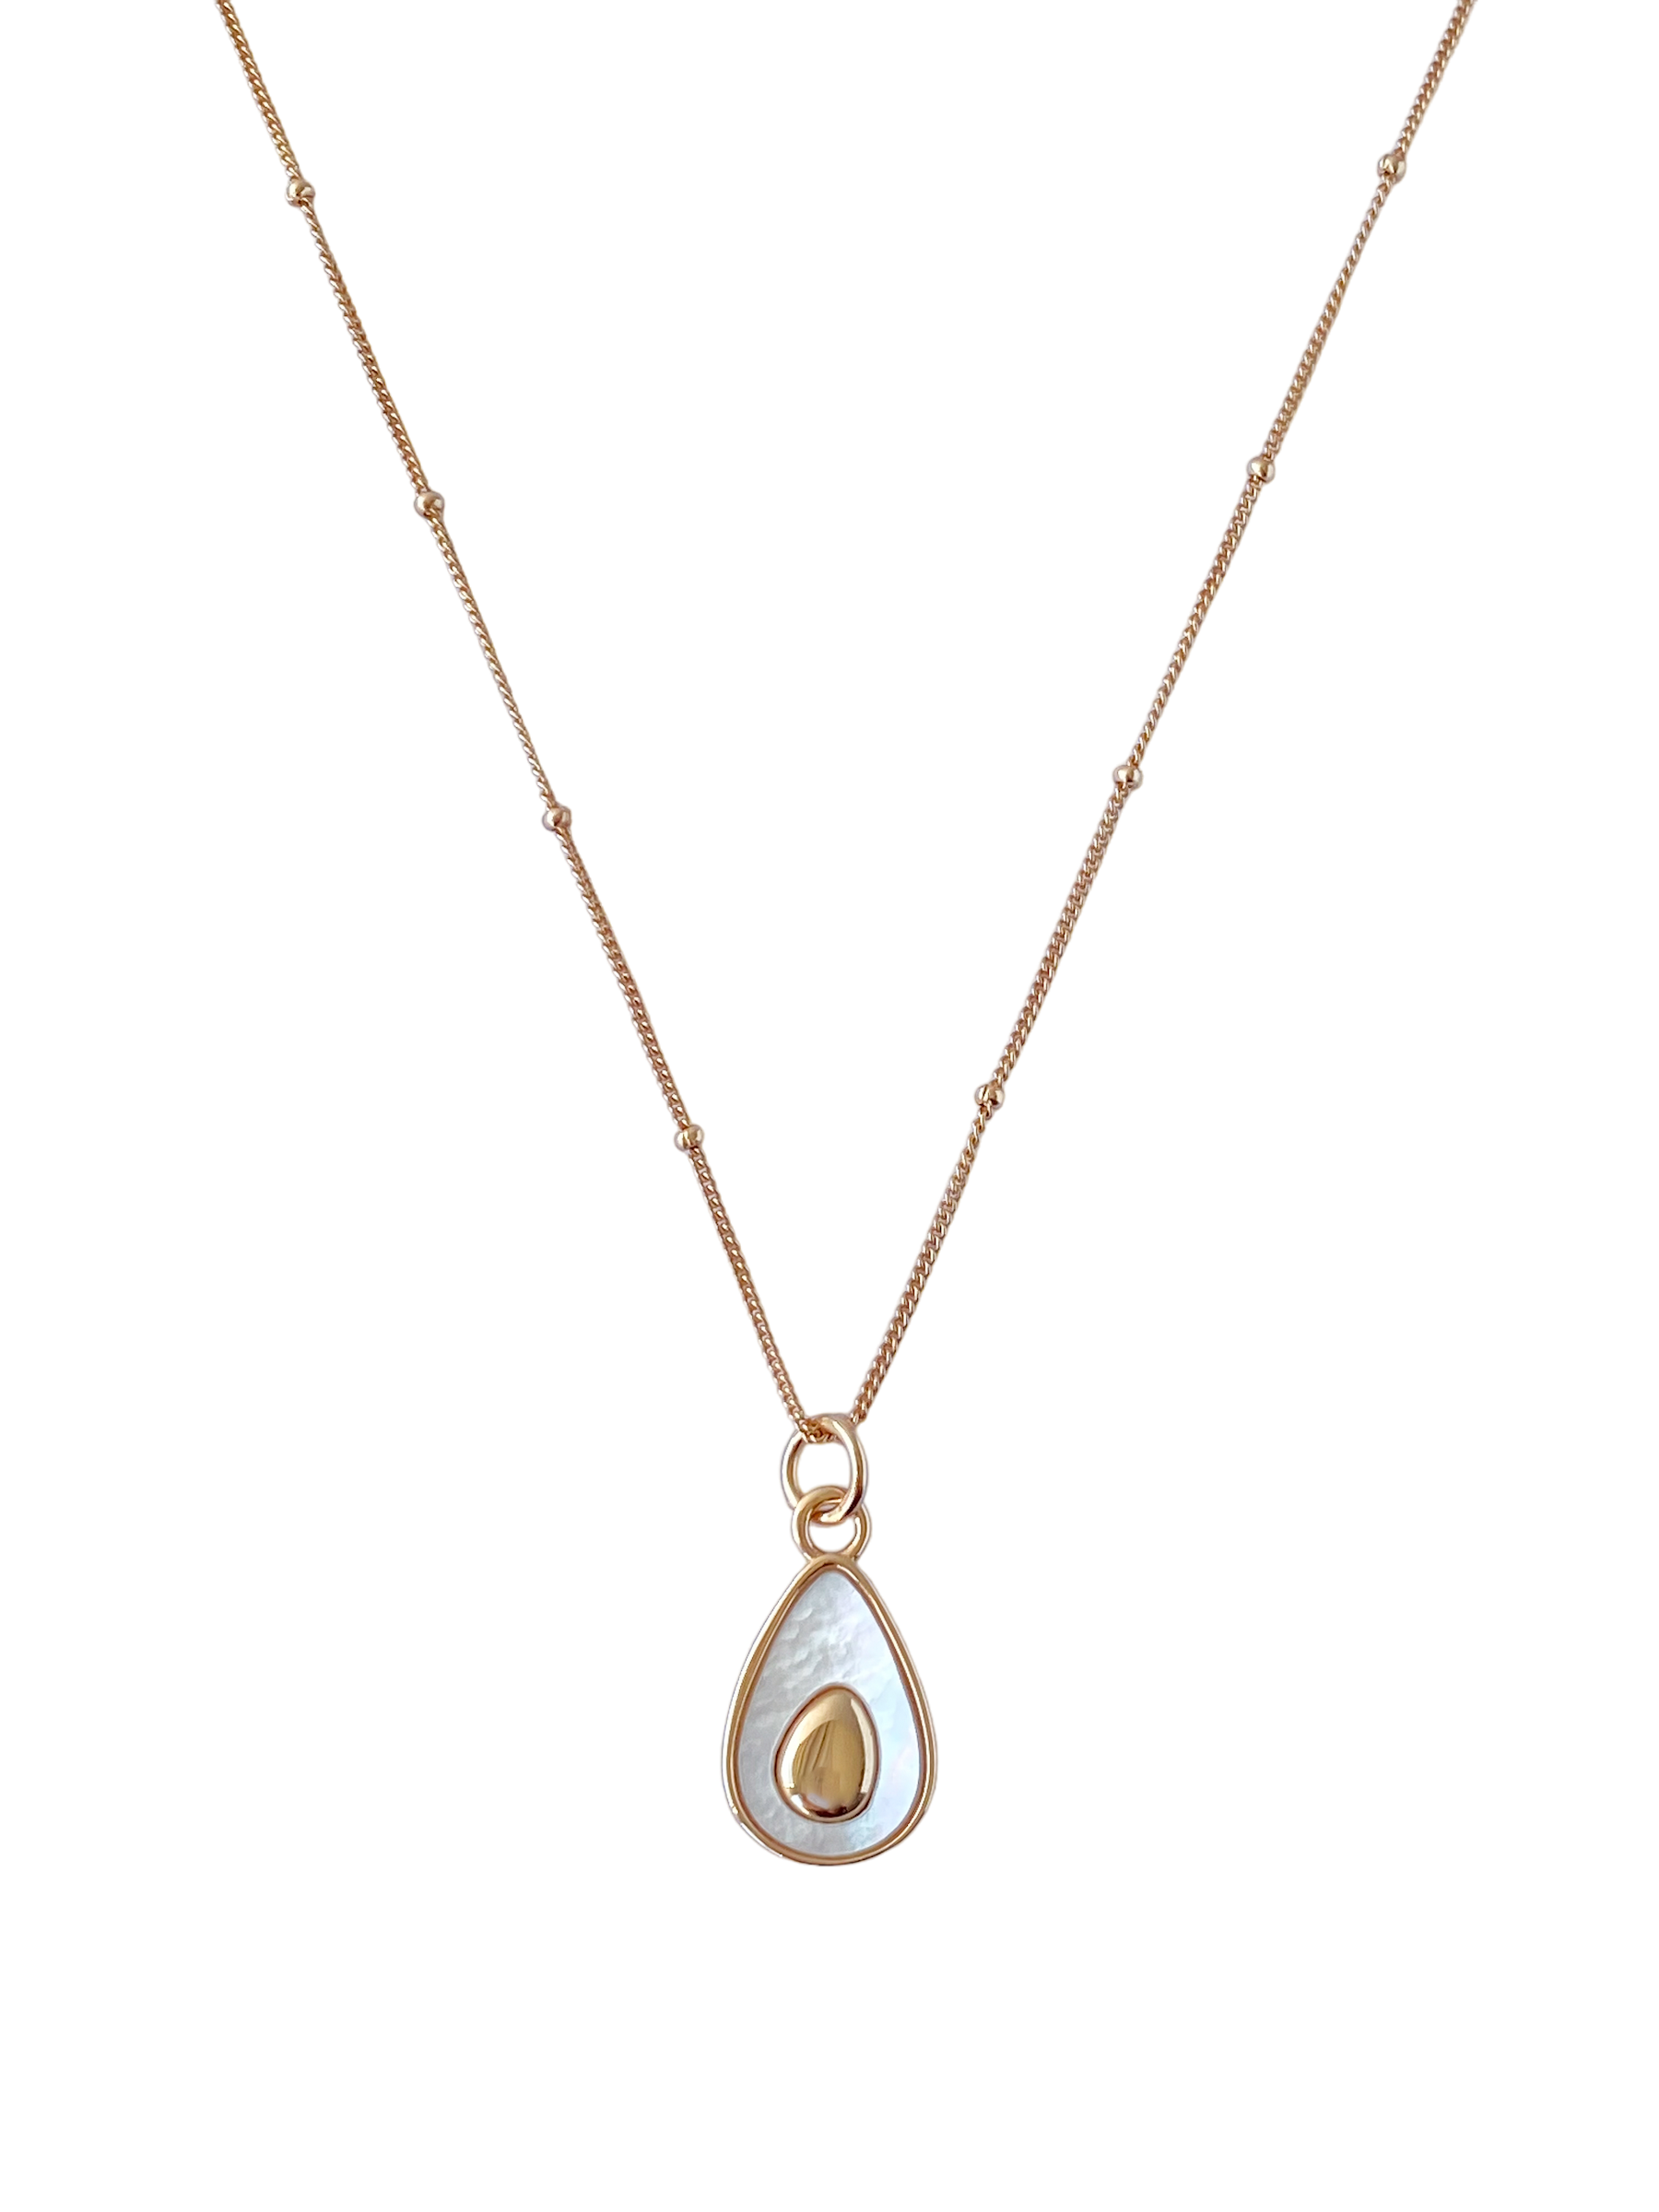 18K Gold Plated Avocado Pendant Necklace